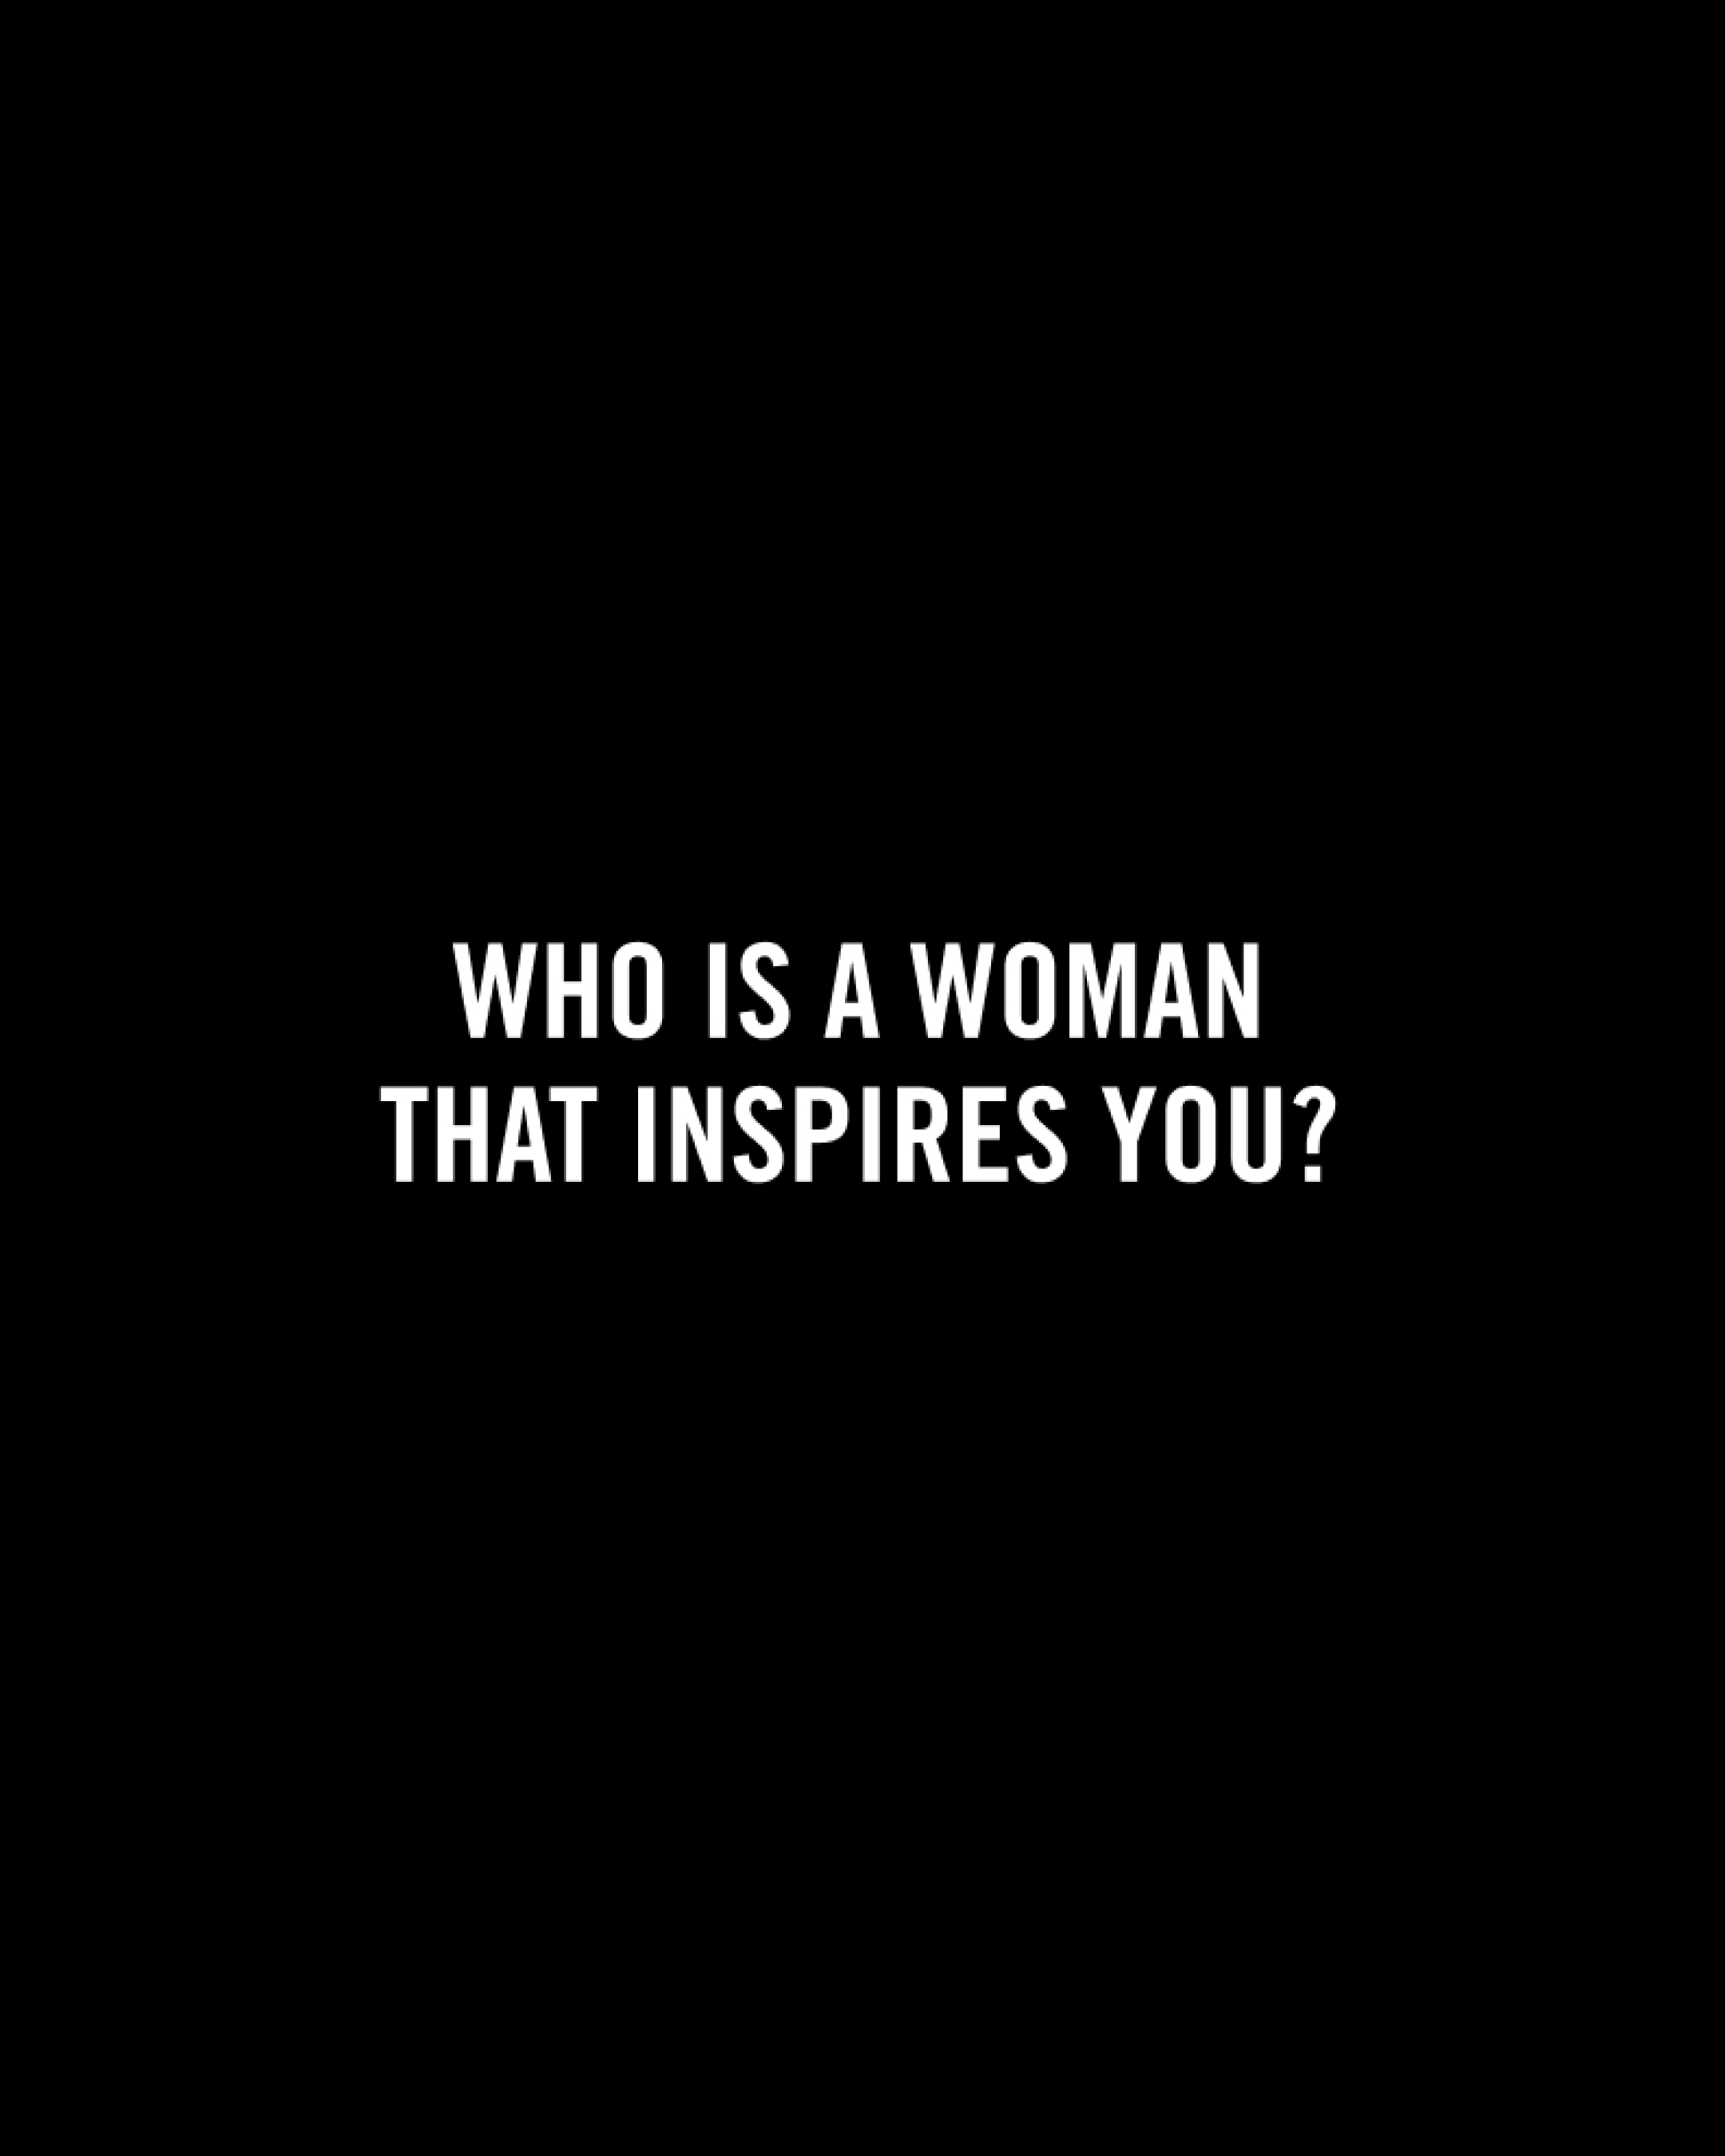 Who is a woman that inspires you?